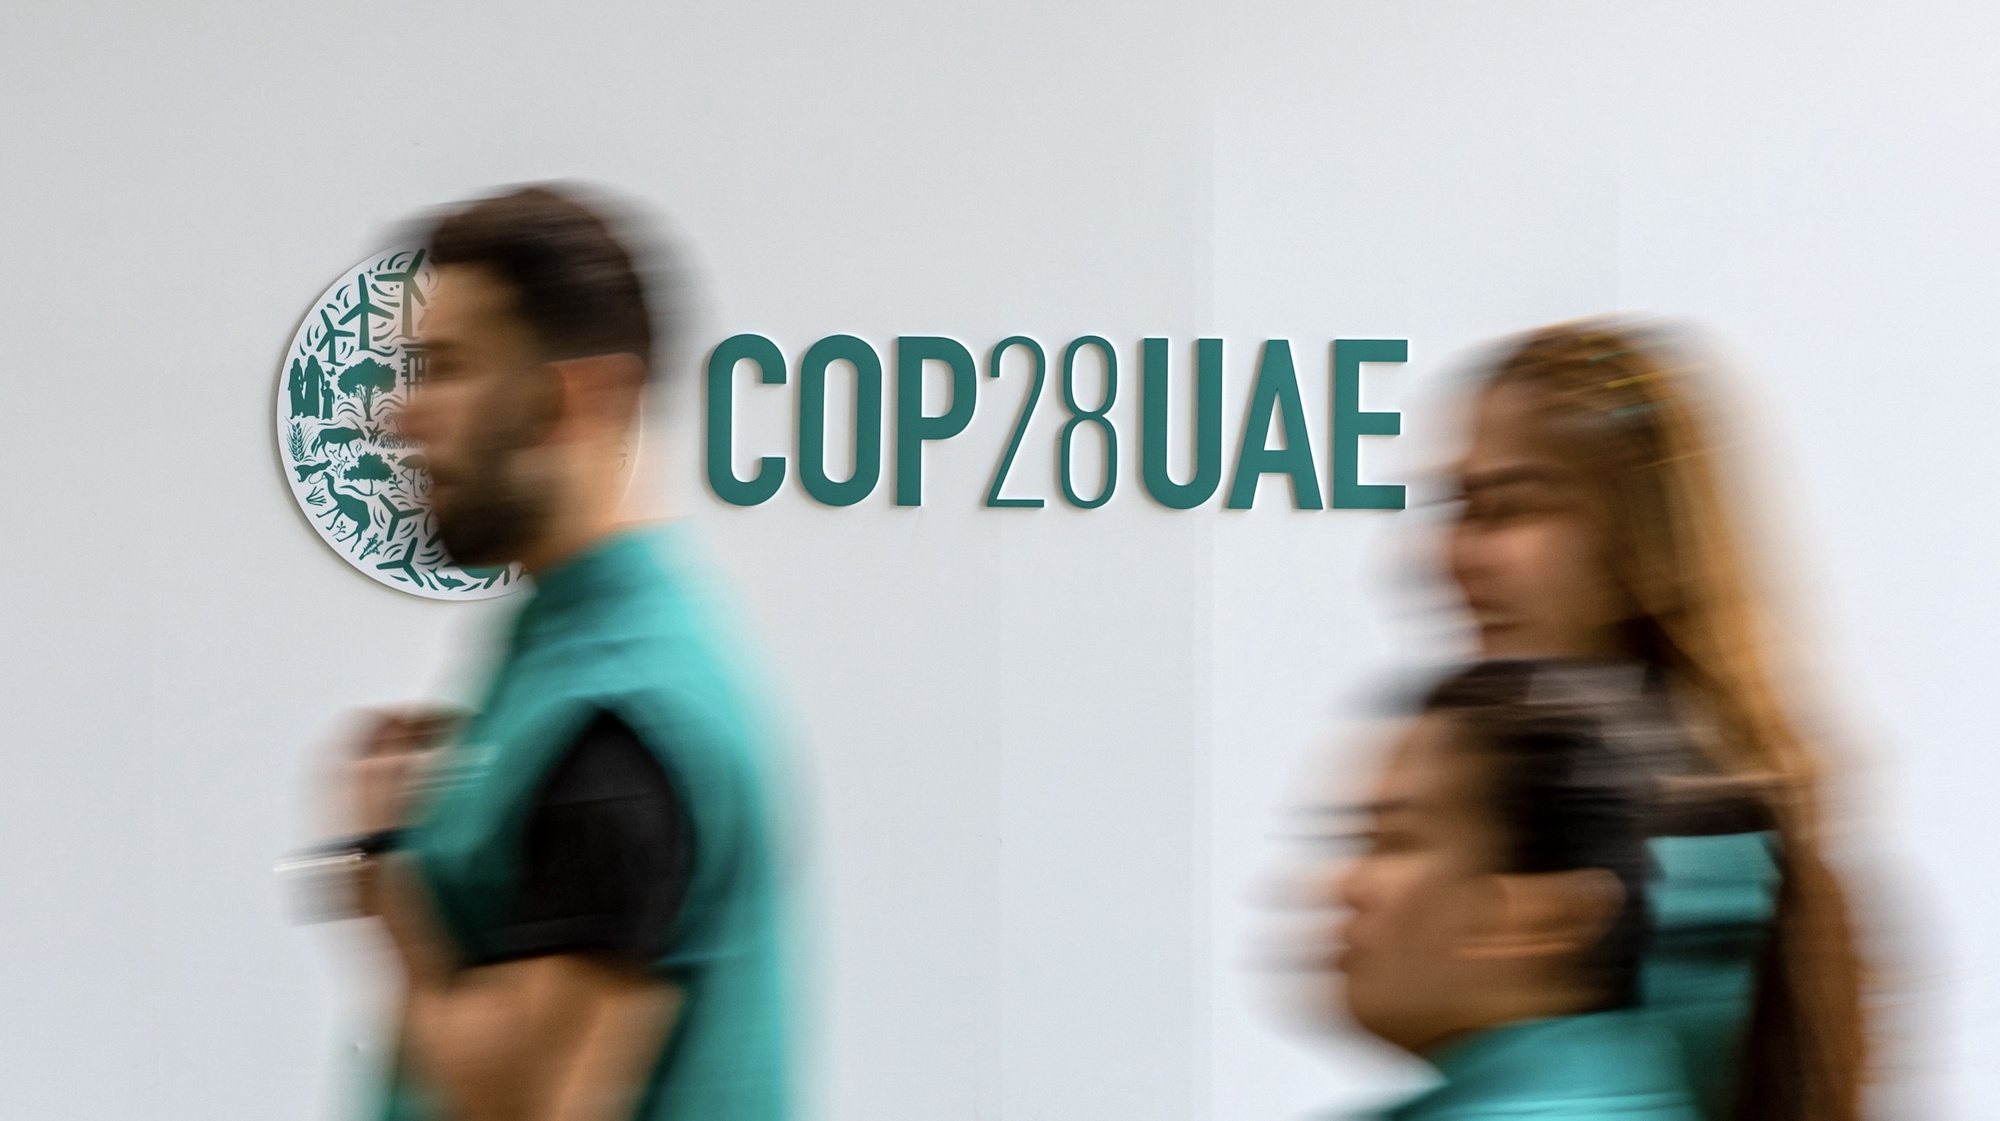 epa11022826 Participants walk past the COP28 logo at Expo Dubai, the venue of the 2023 United Nations Climate Change Conference (COP28), in Dubai, United Arab Emirates, 11 December 2023. COP28 runs from 30 November to 12 December, and is expected to host one of the largest number of participants in the annual global climate conference as over 70,000 estimated attendees, including the member states of the UN Framework Convention on Climate Change (UNFCCC), business leaders, young people, climate scientists, Indigenous Peoples and other relevant stakeholders will attend.  EPA/MARTIN DIVISEK